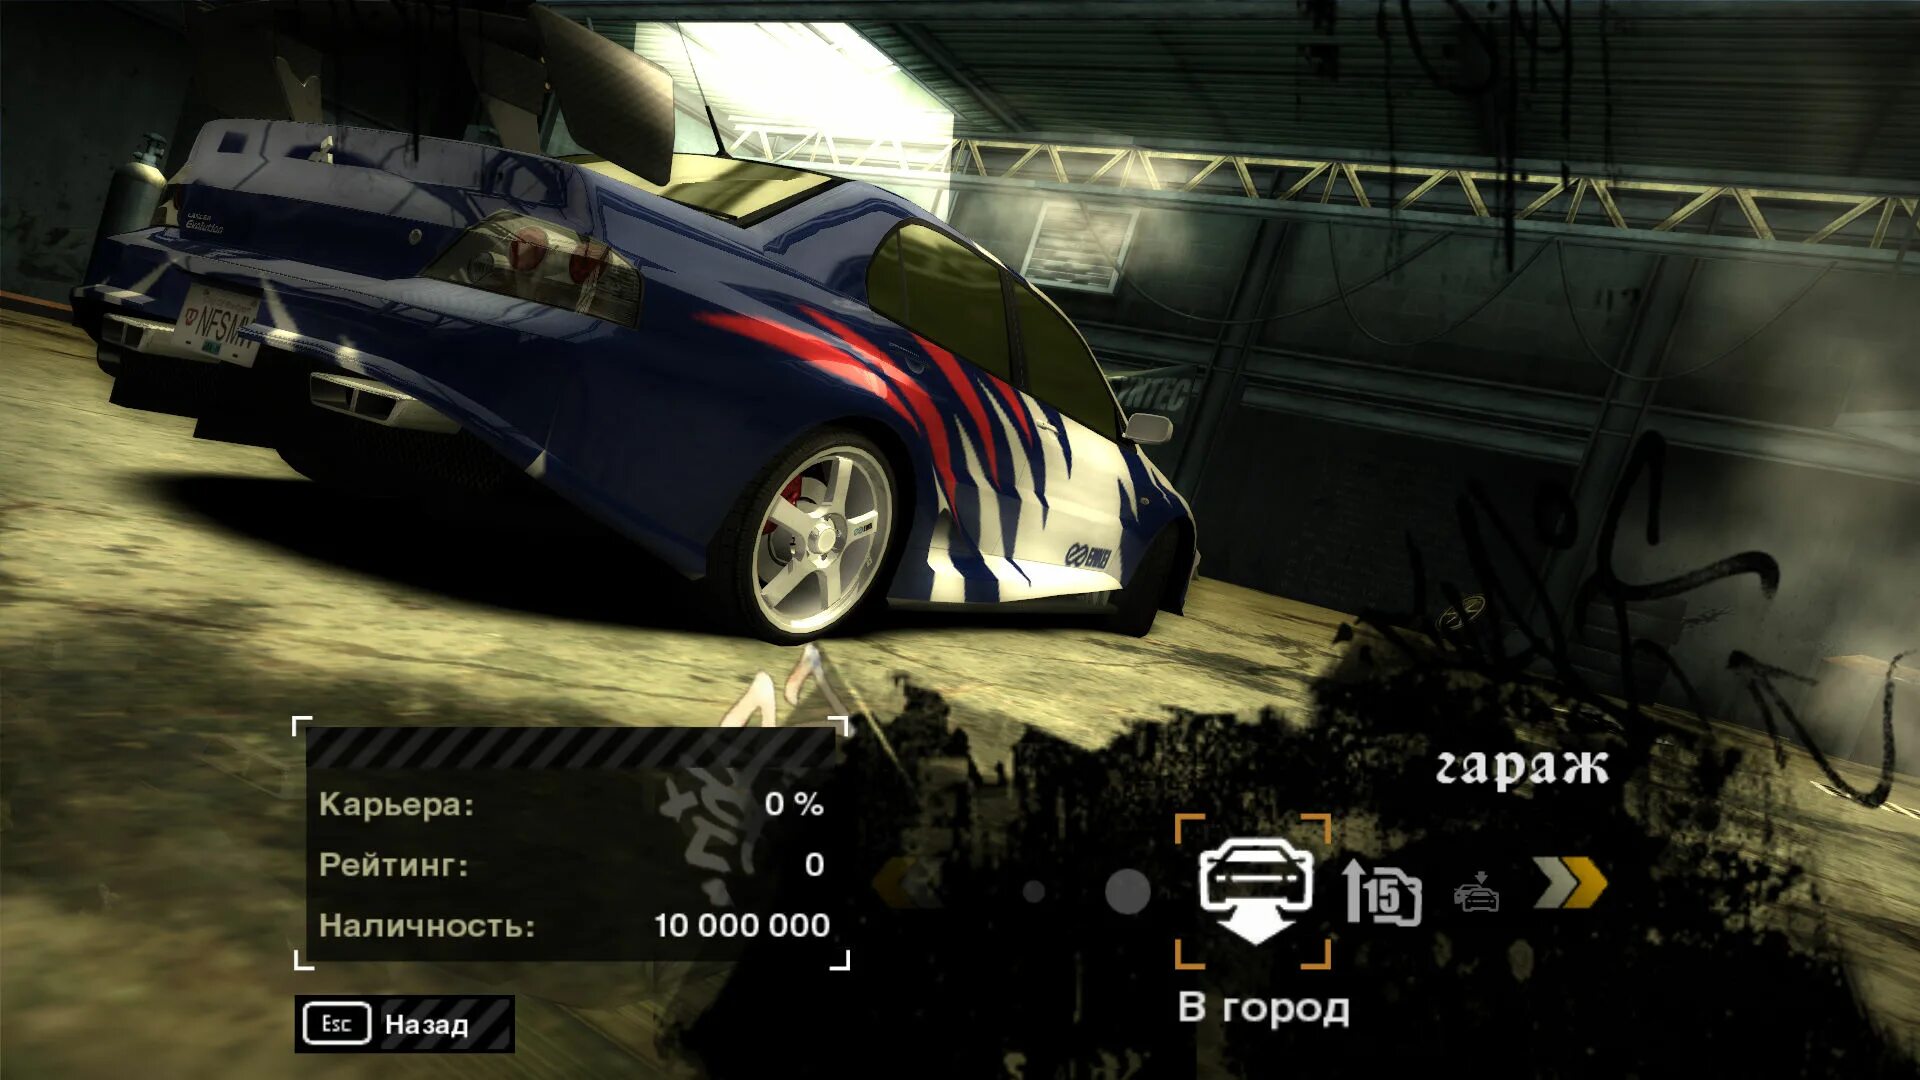 NFS most wanted 2005 Mitsubishi Lancer Evolution. Need for Speed most wanted 2005 Mitsubishi Lancer. Митсубиси Лансер 9 NFS most wanted. Lancer 9 из NFS most wanted.